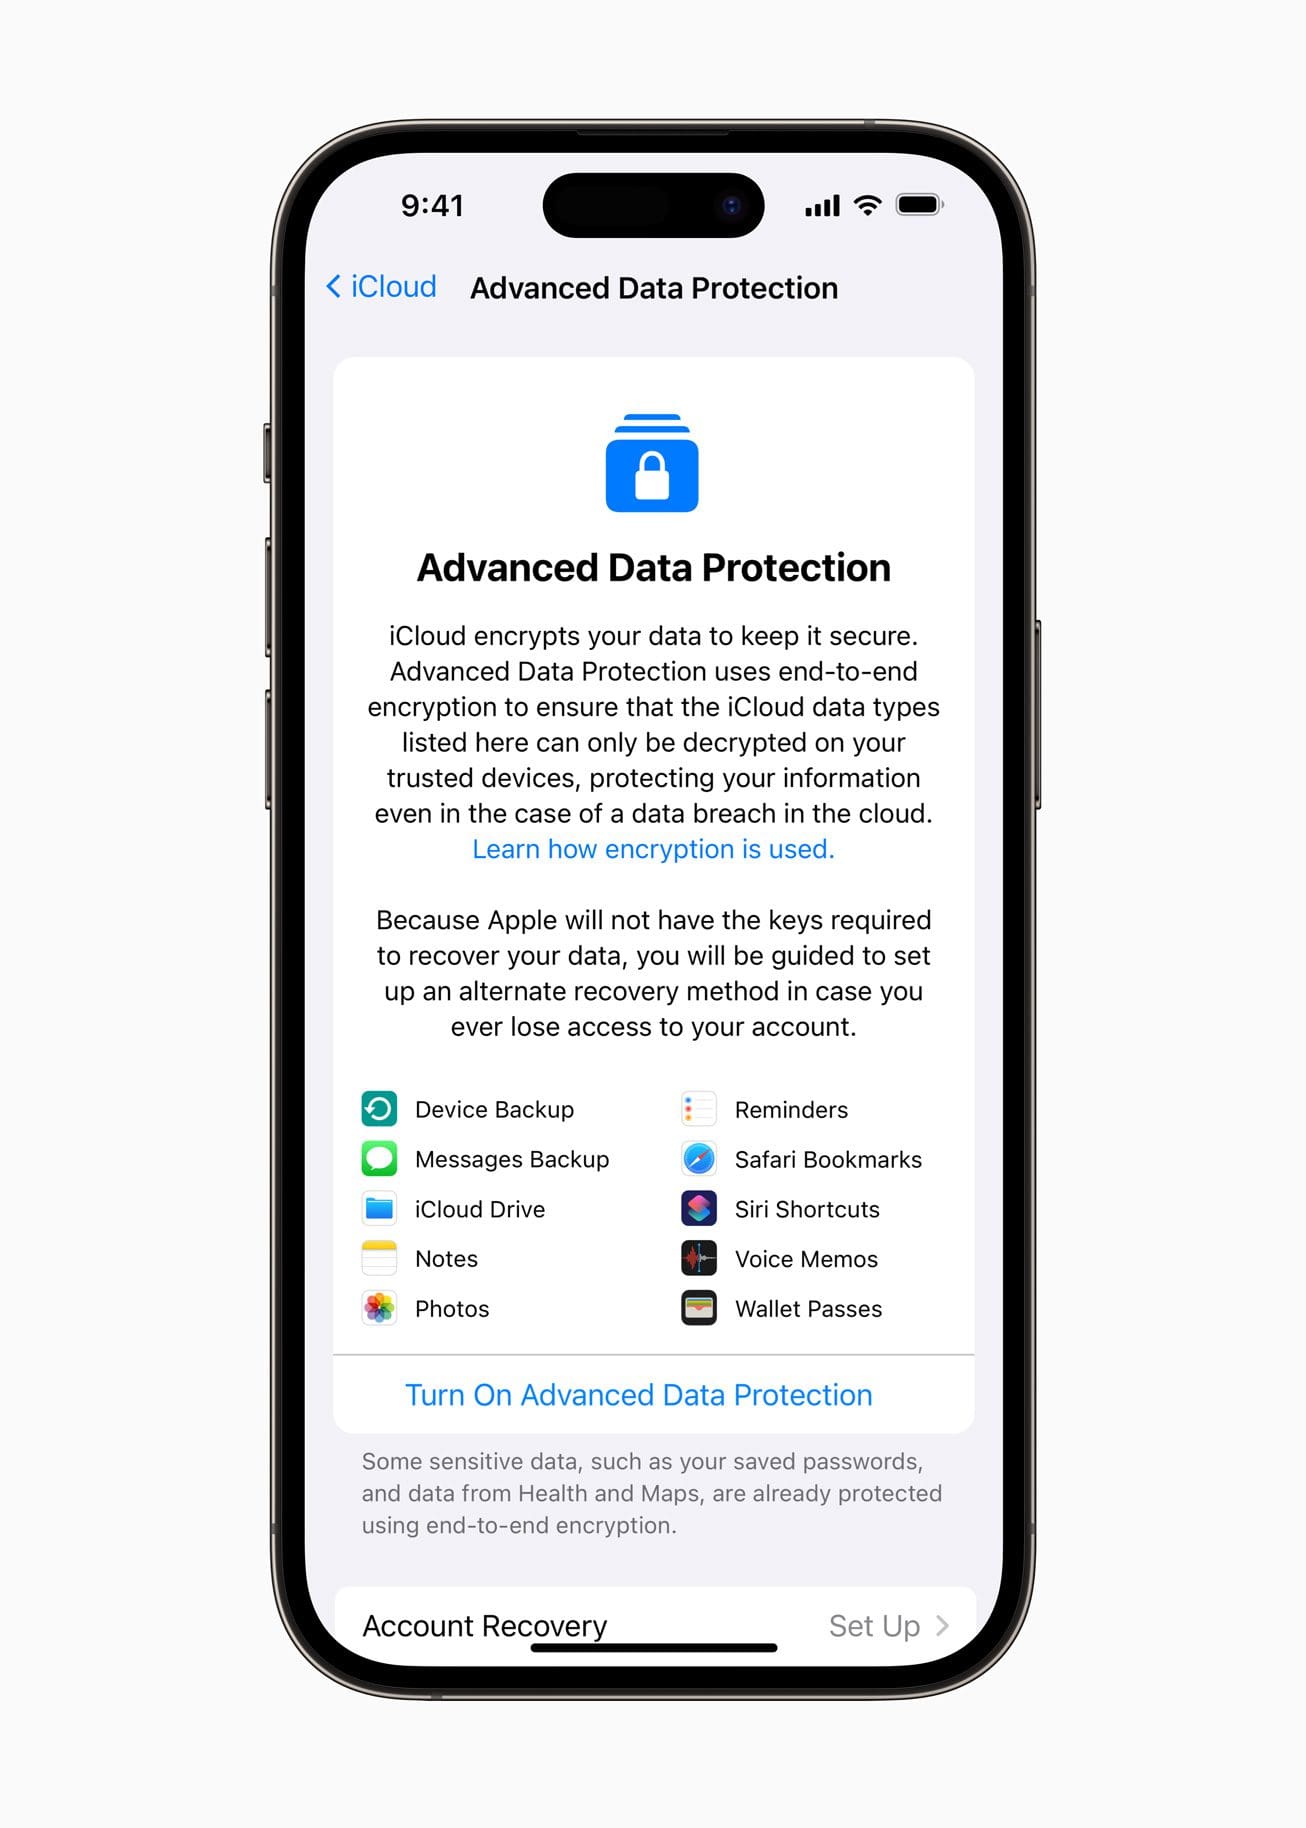 How to Turn on Apple's Advanced Data Protection for iCloud on iPhone